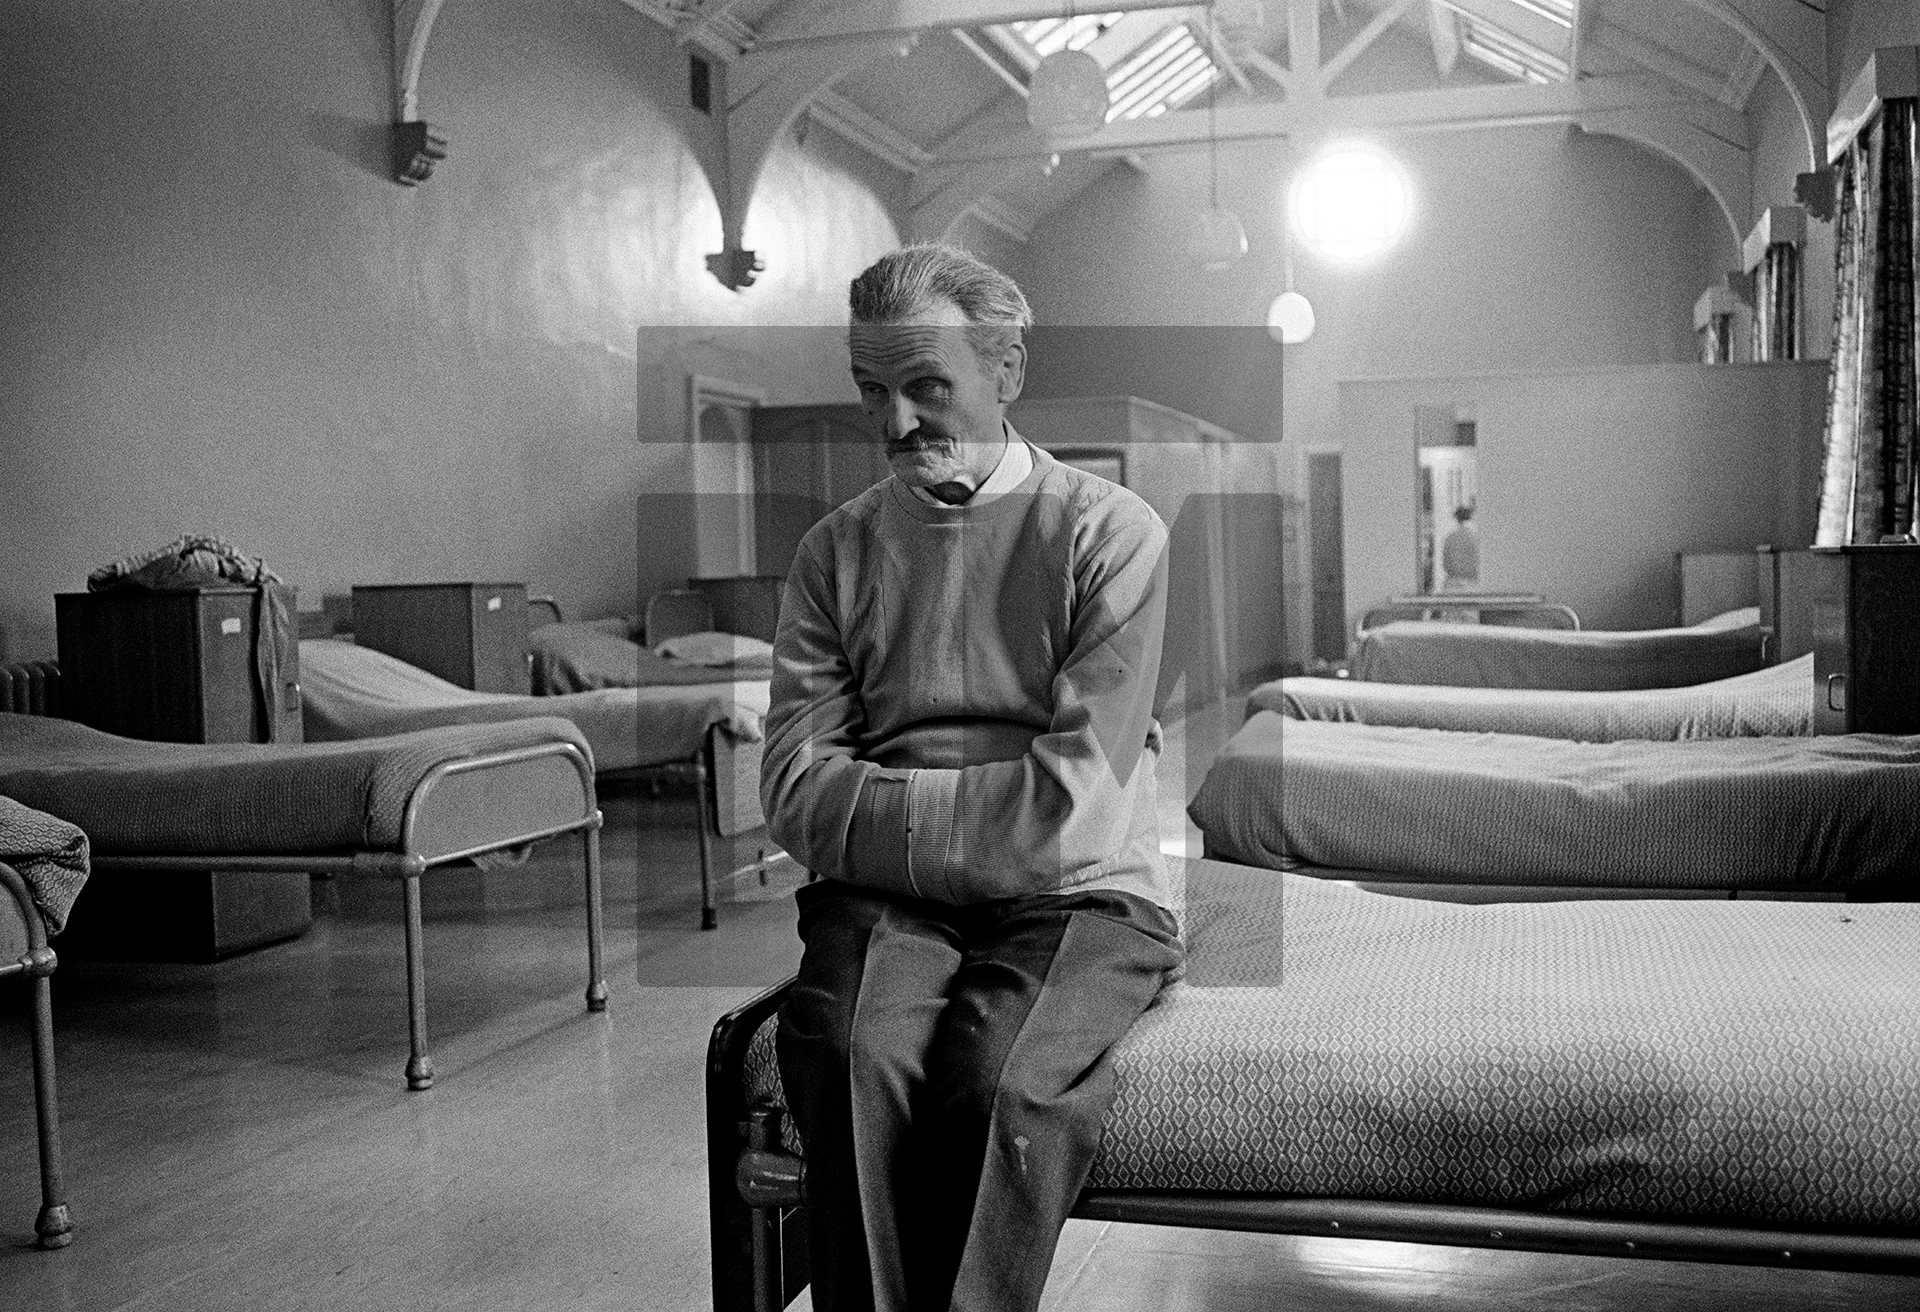 John Keeley, aged 63, formerly an unholsterer, is described as being ‘catatonic’. He stands or sits motionless for hours in one position. February 1978 by Daniel Meadows